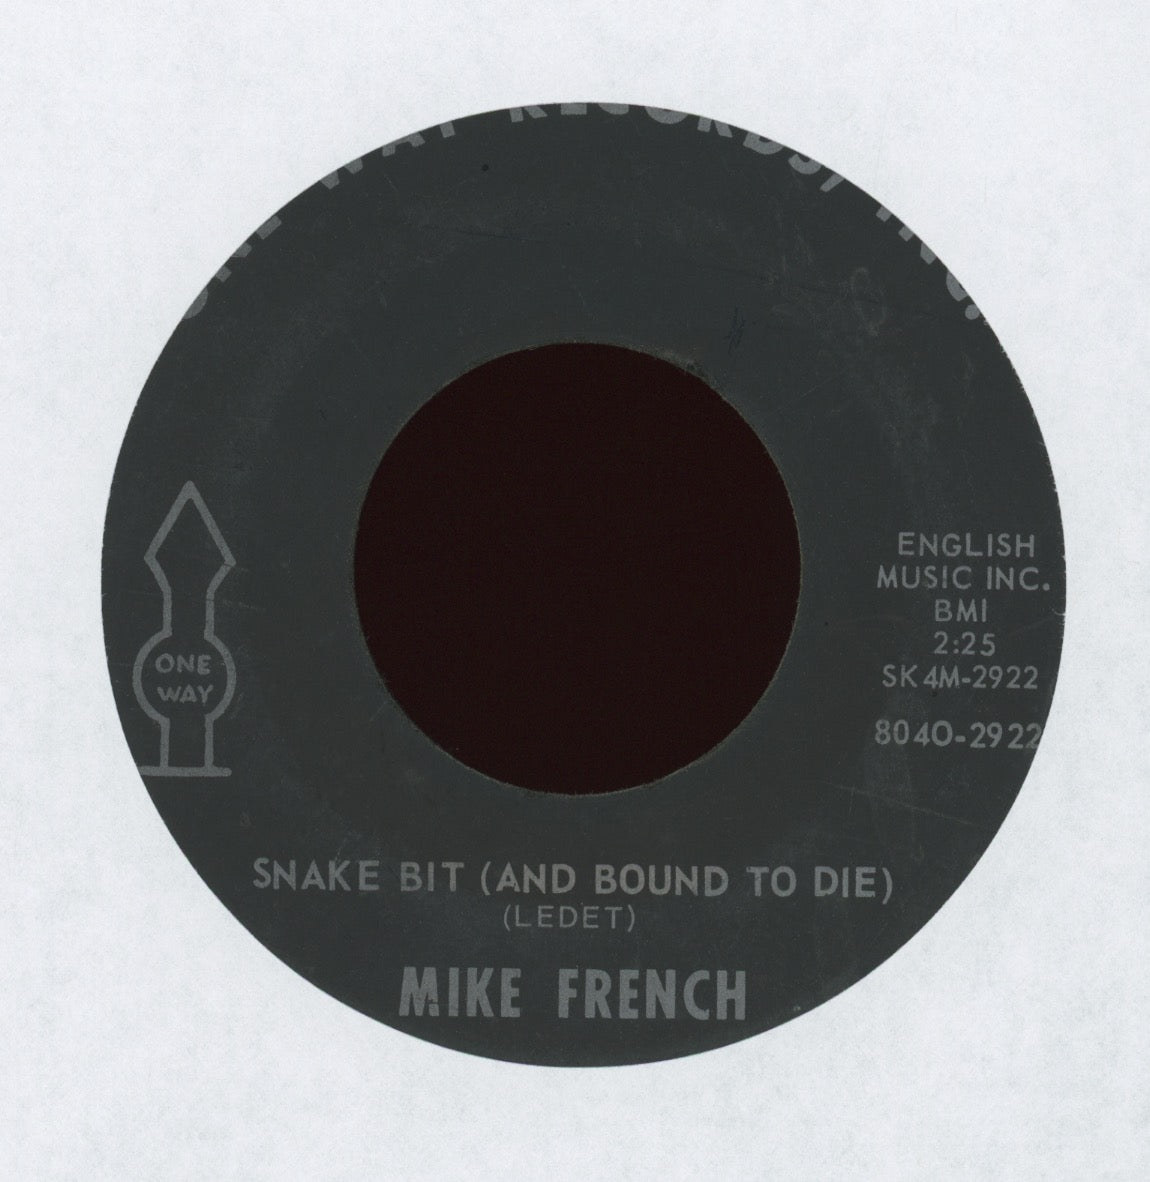 Mike French - Snake Bit (And Bound to Die) on One Way Records Obscure Rocker